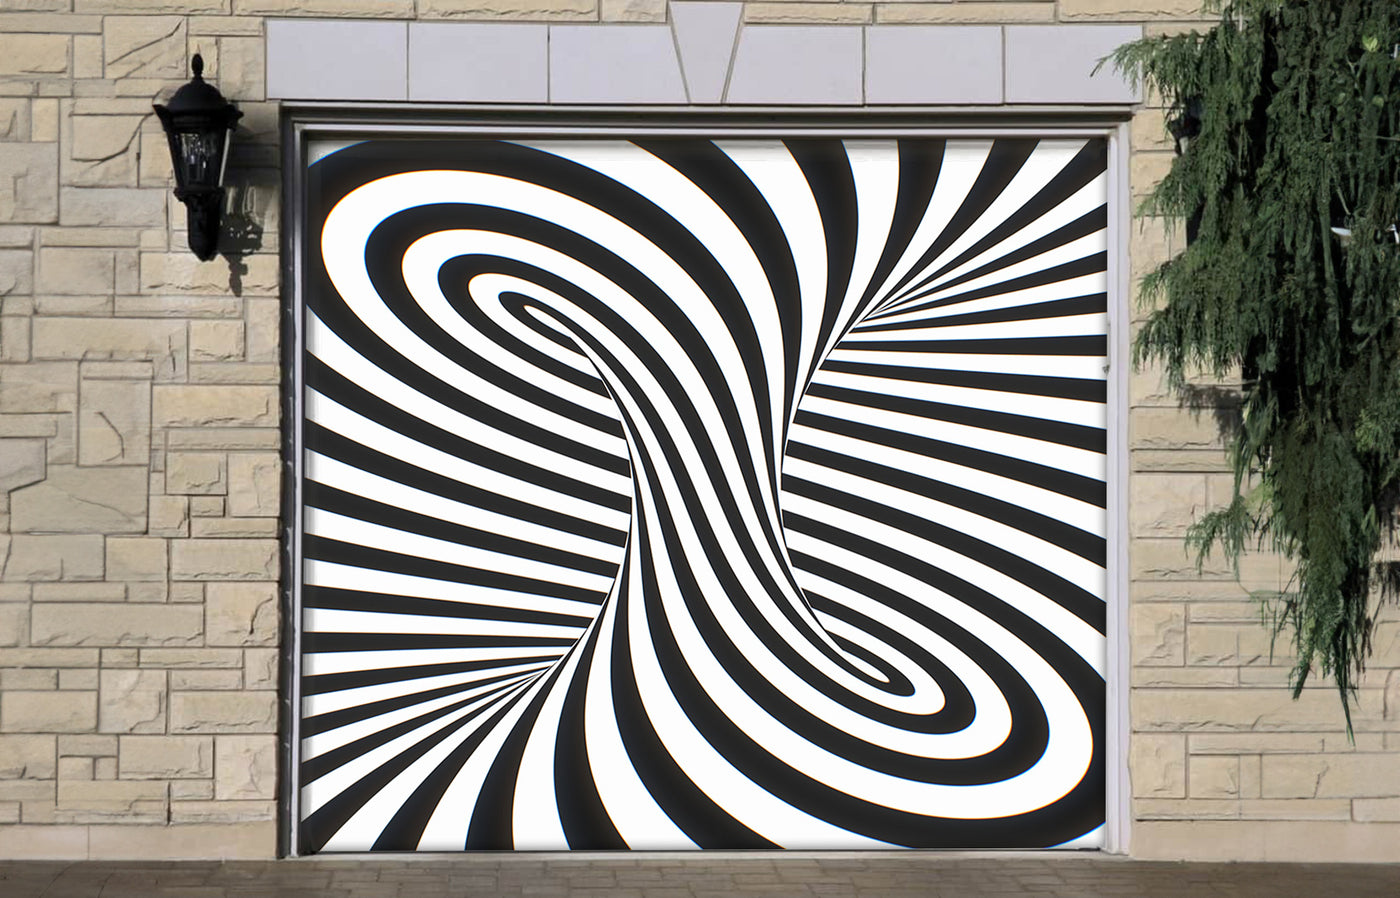 Twisted Black White Hypnotic Optical Illusion Psychedelic Stripes Garage Door Cover Wrap